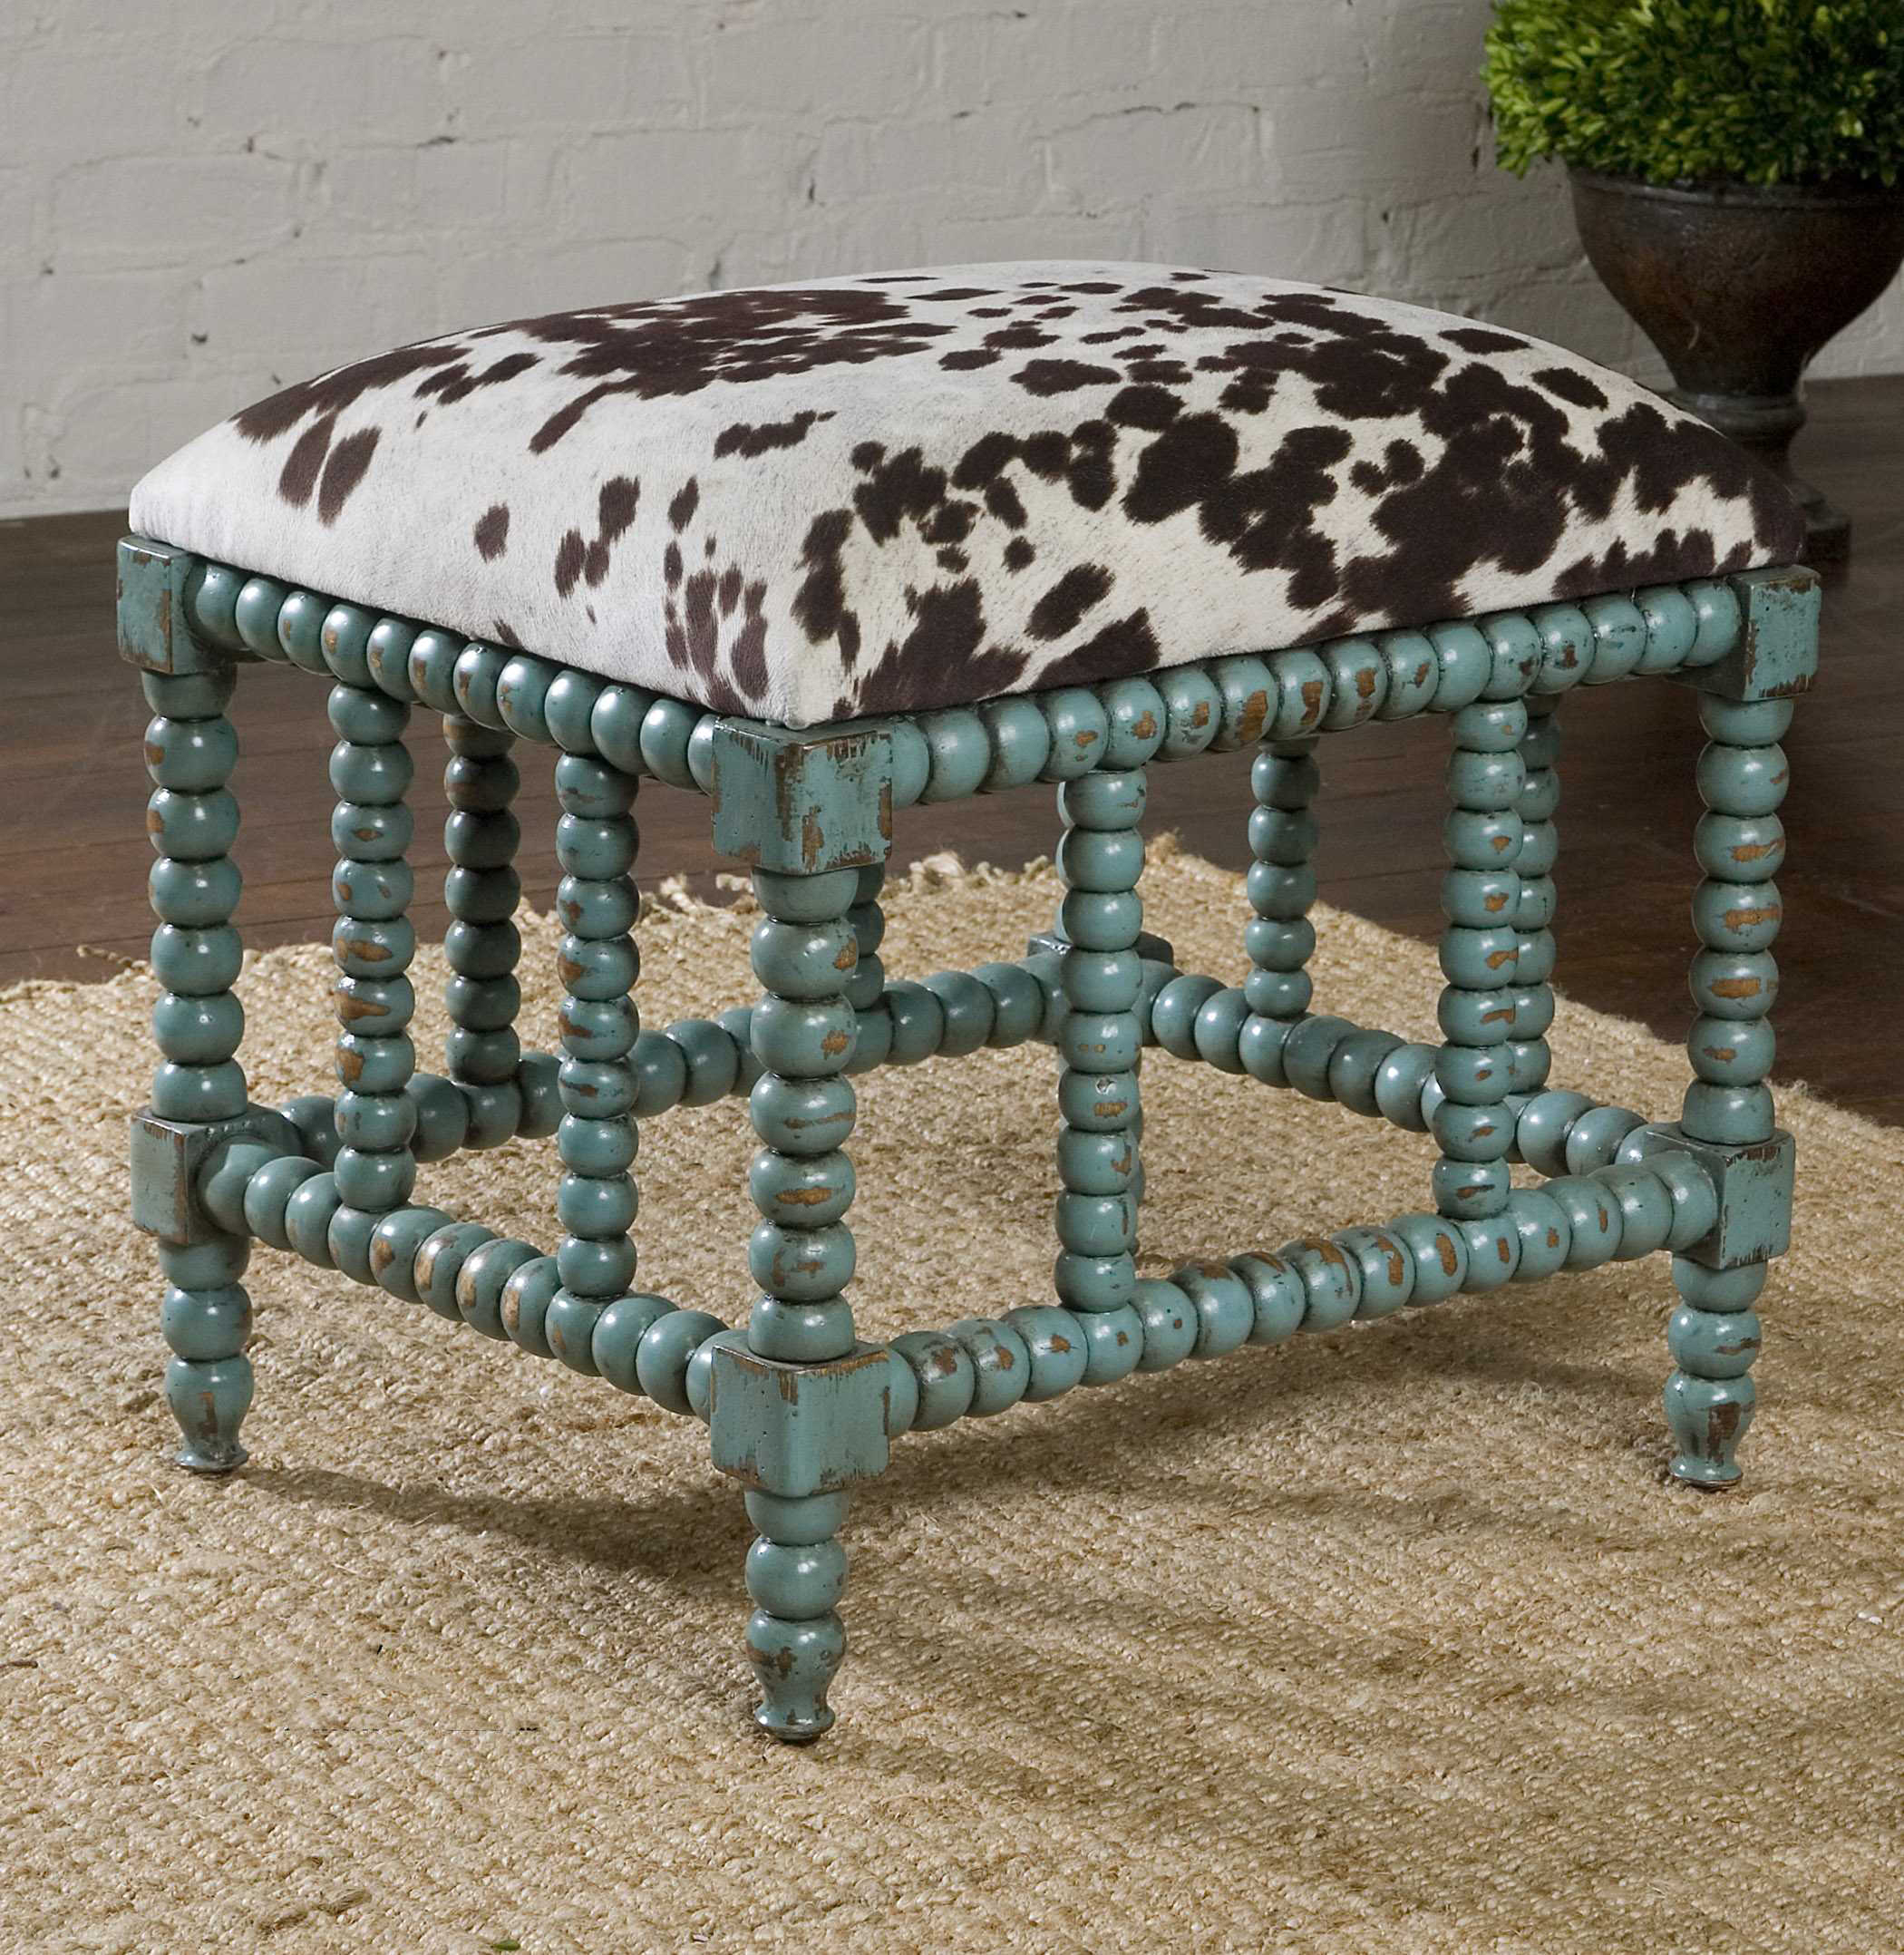 Footstools for sale